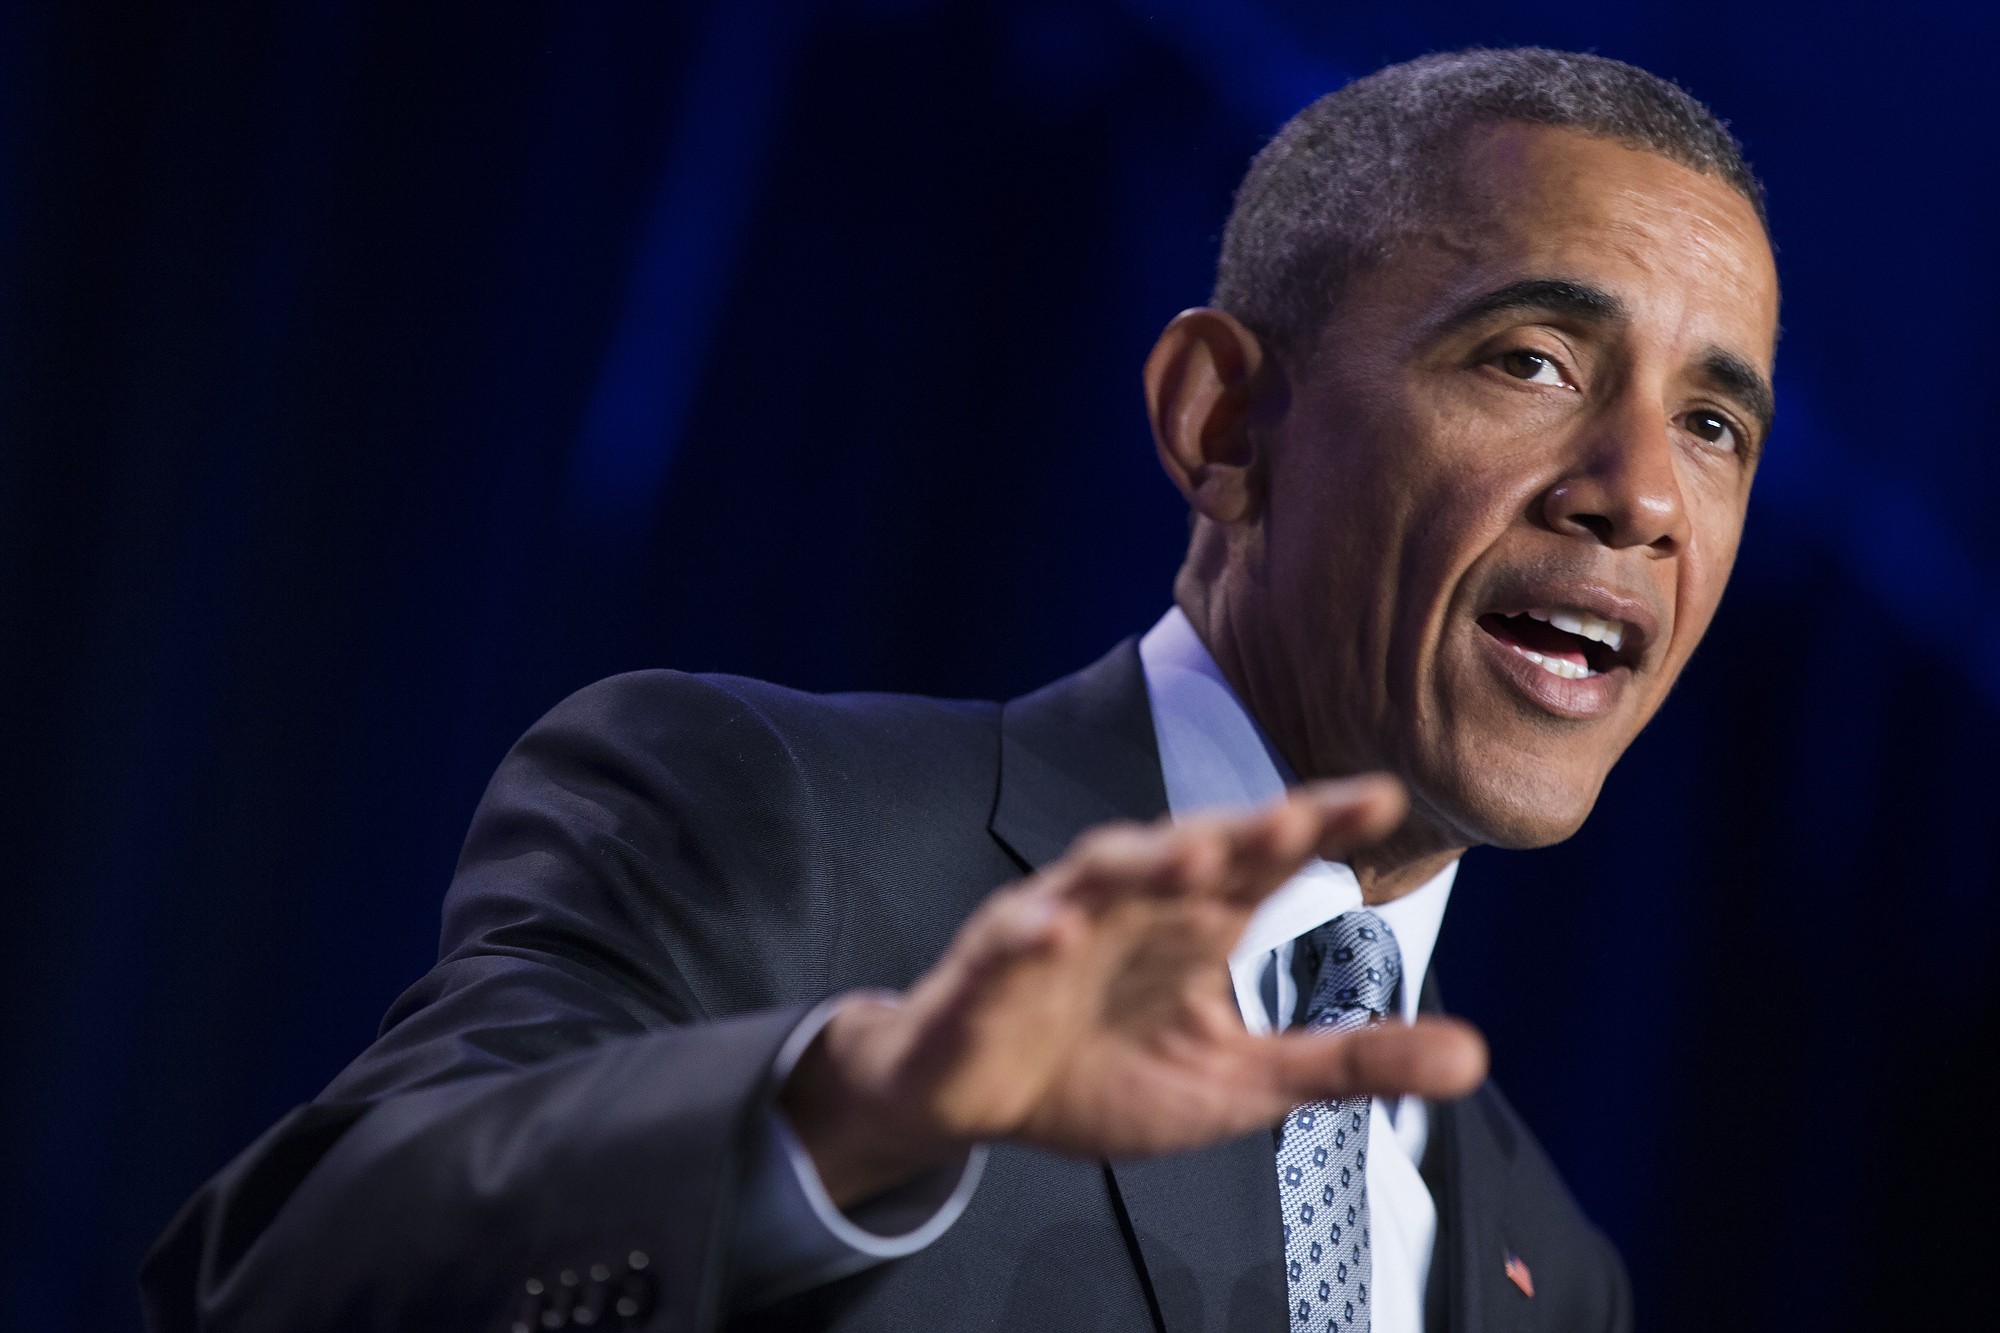 President Barack Obama speaks at the Democratic National Committee winter meeting in Washington on Friday.